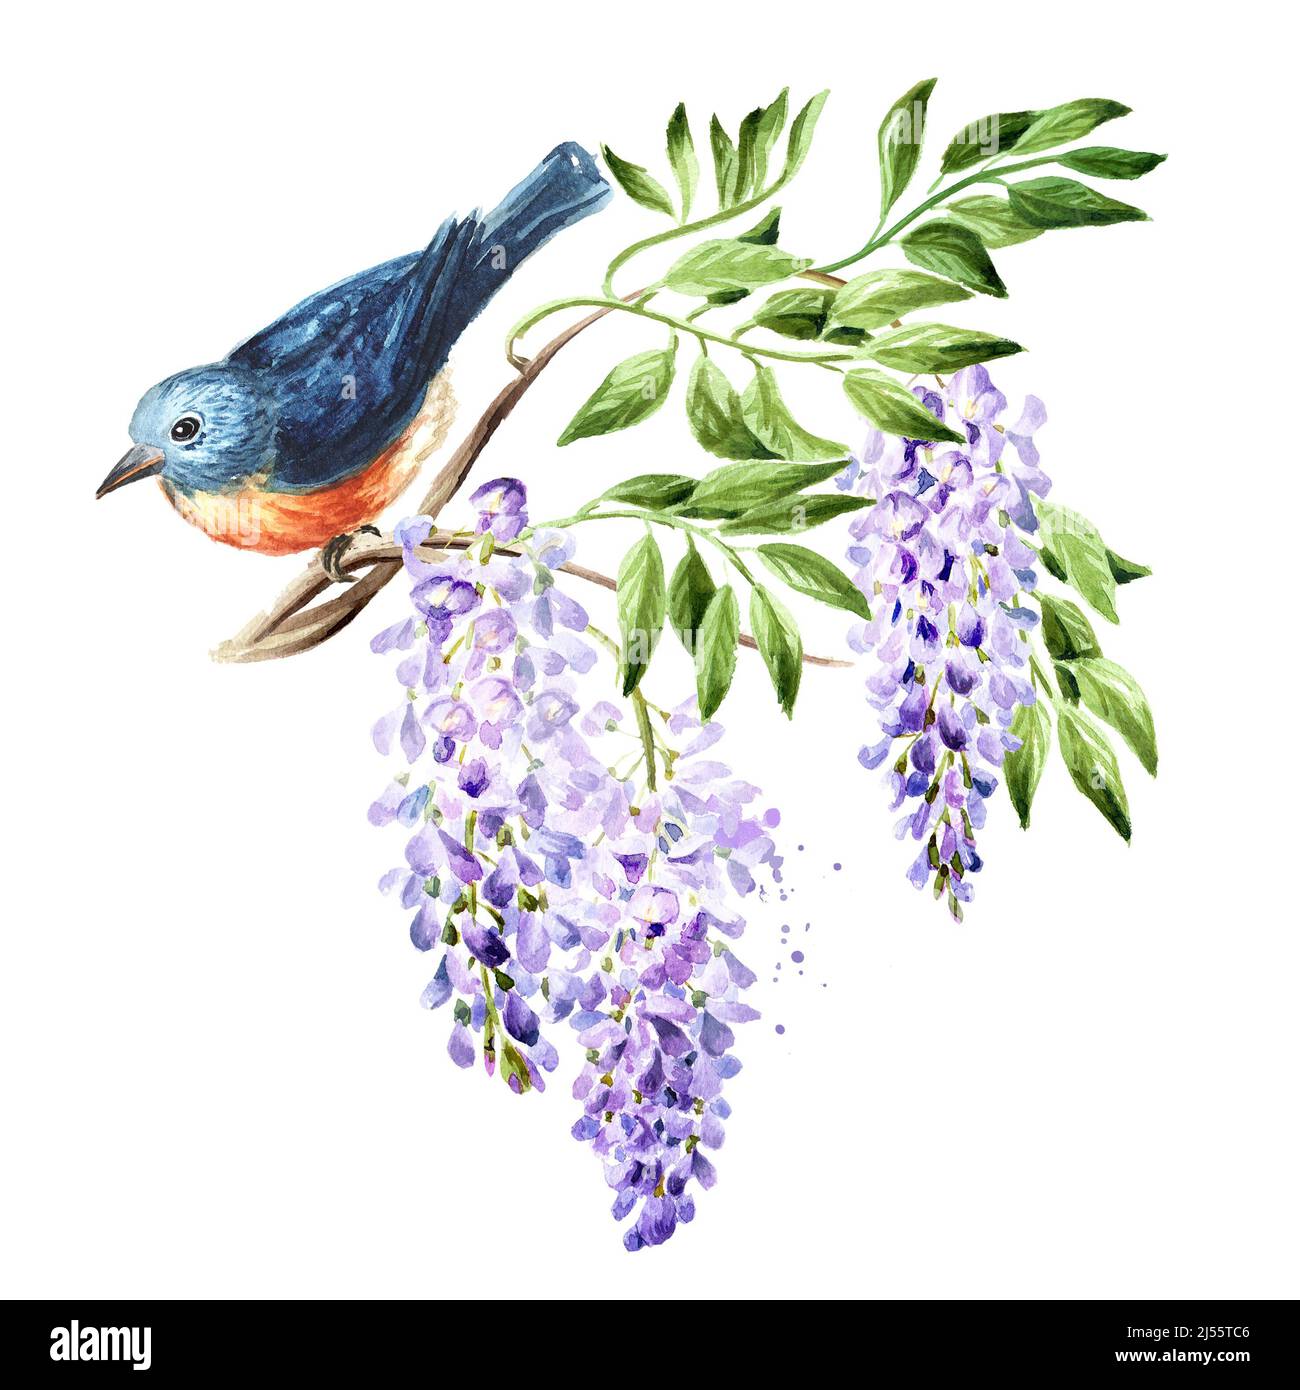 Bird sitting on a flowering wisteria branch, Spring concept. Hand drawn watercolor illustration isolated on white background Stock Photo